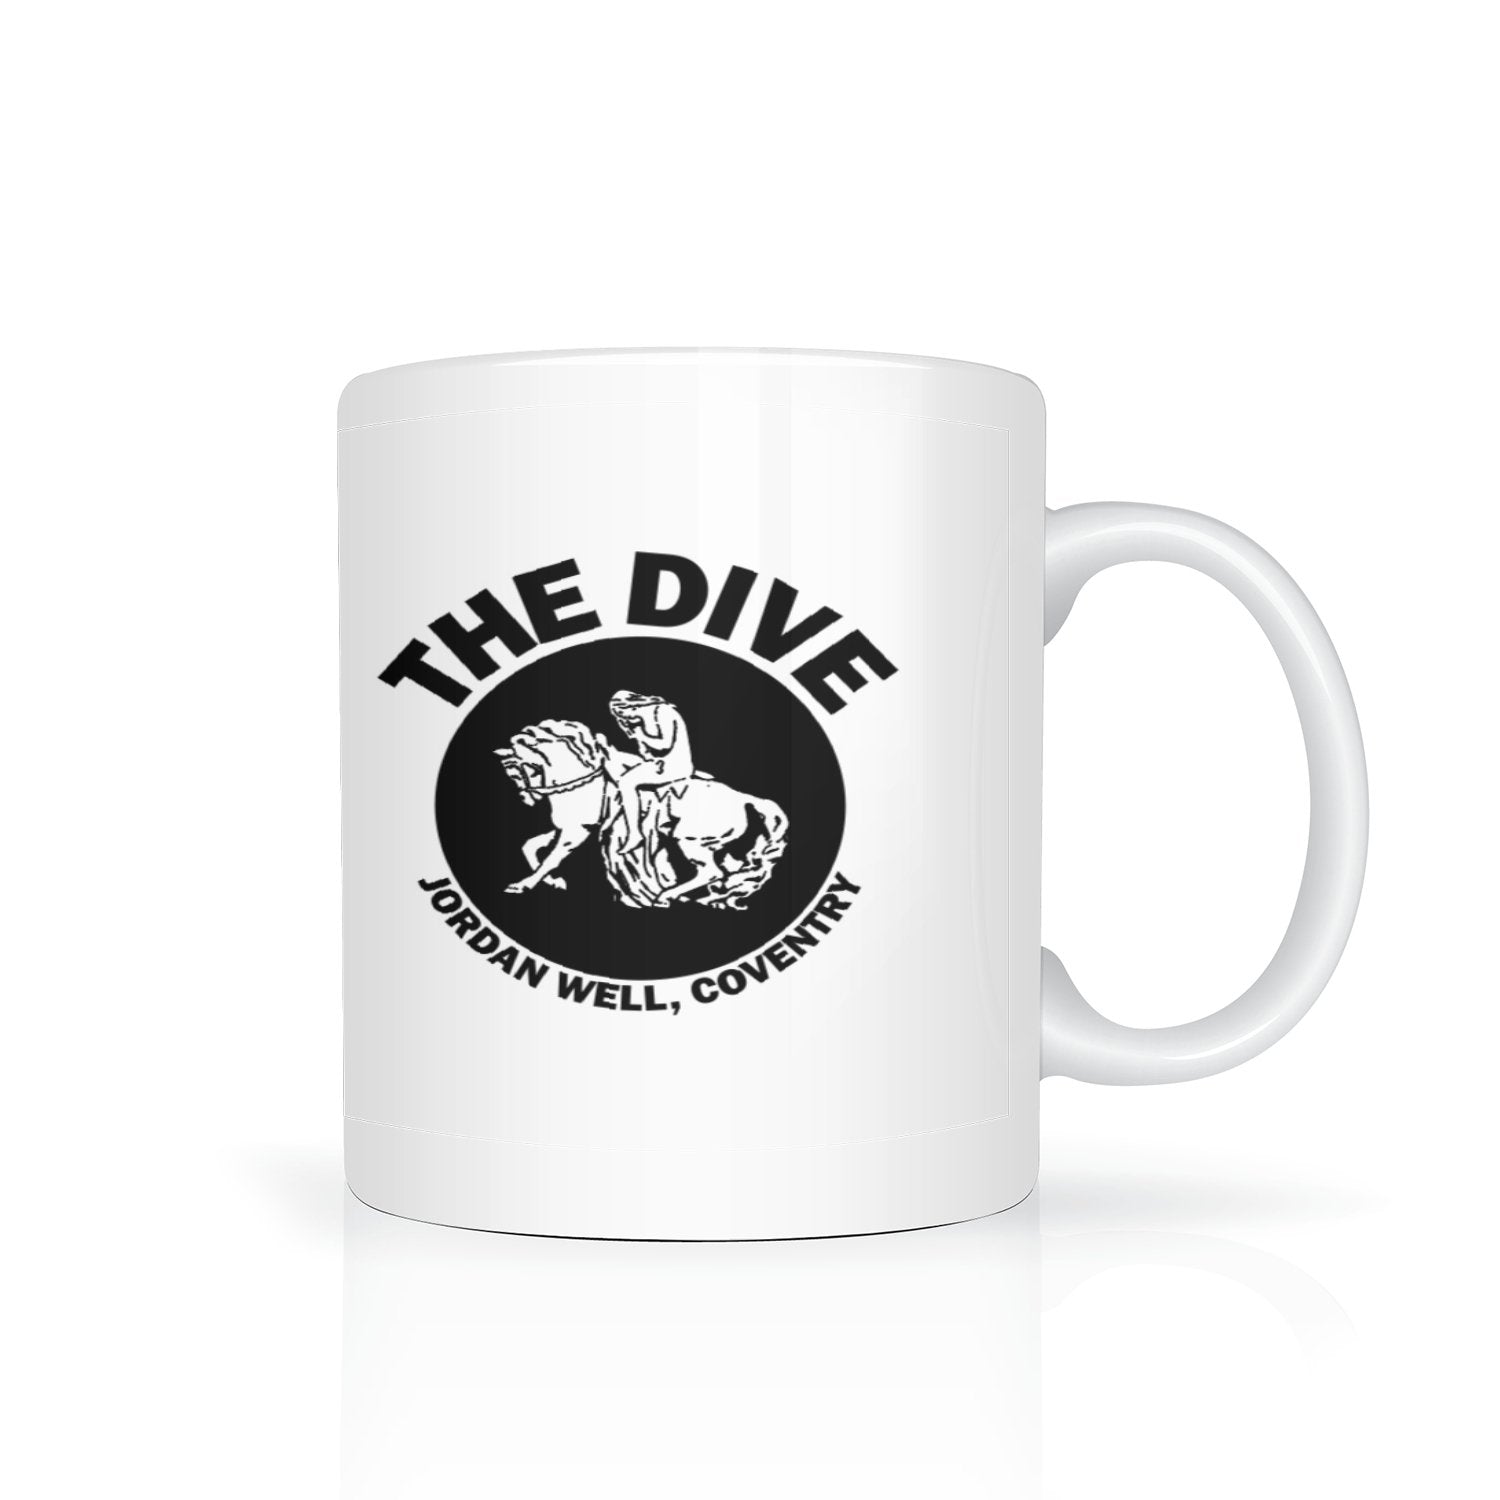 The Dive - Coventry - mug - Dirty Stop Outs